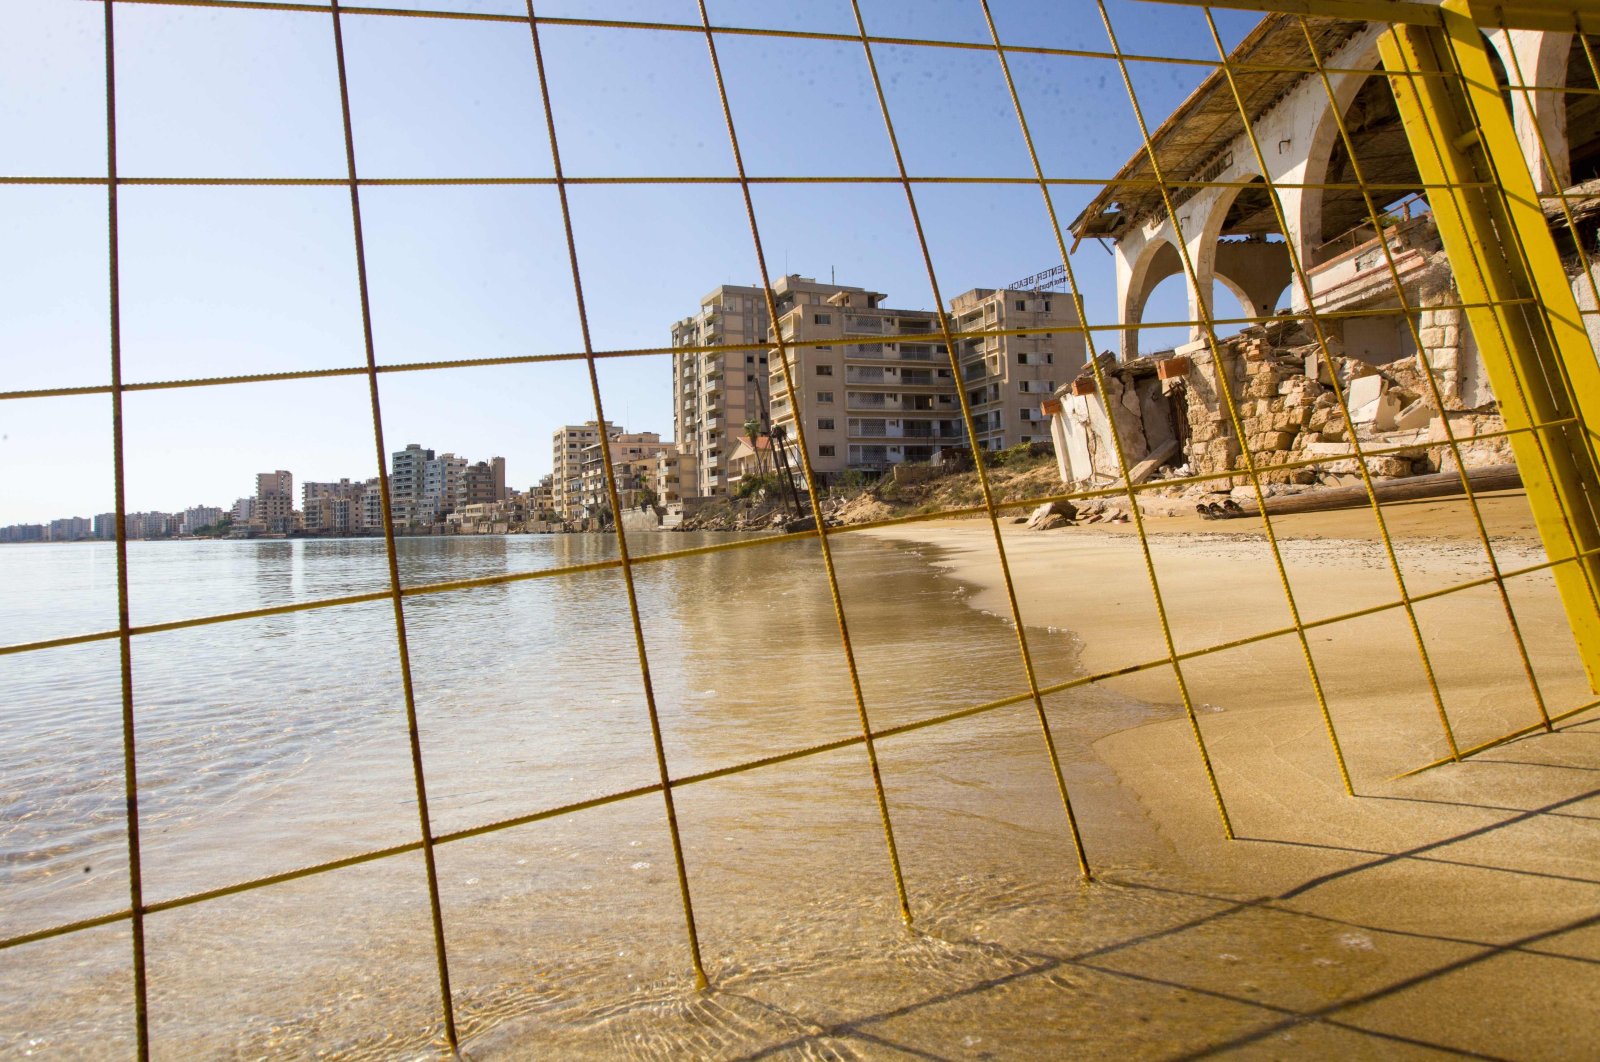 Derelict hotels, restaurants and residential buildings remain abandoned at the fenced-off beachfront eastern town of Varosha (Maraş), in Northern Cyprus, on Oct. 14, 2020. (AFP)